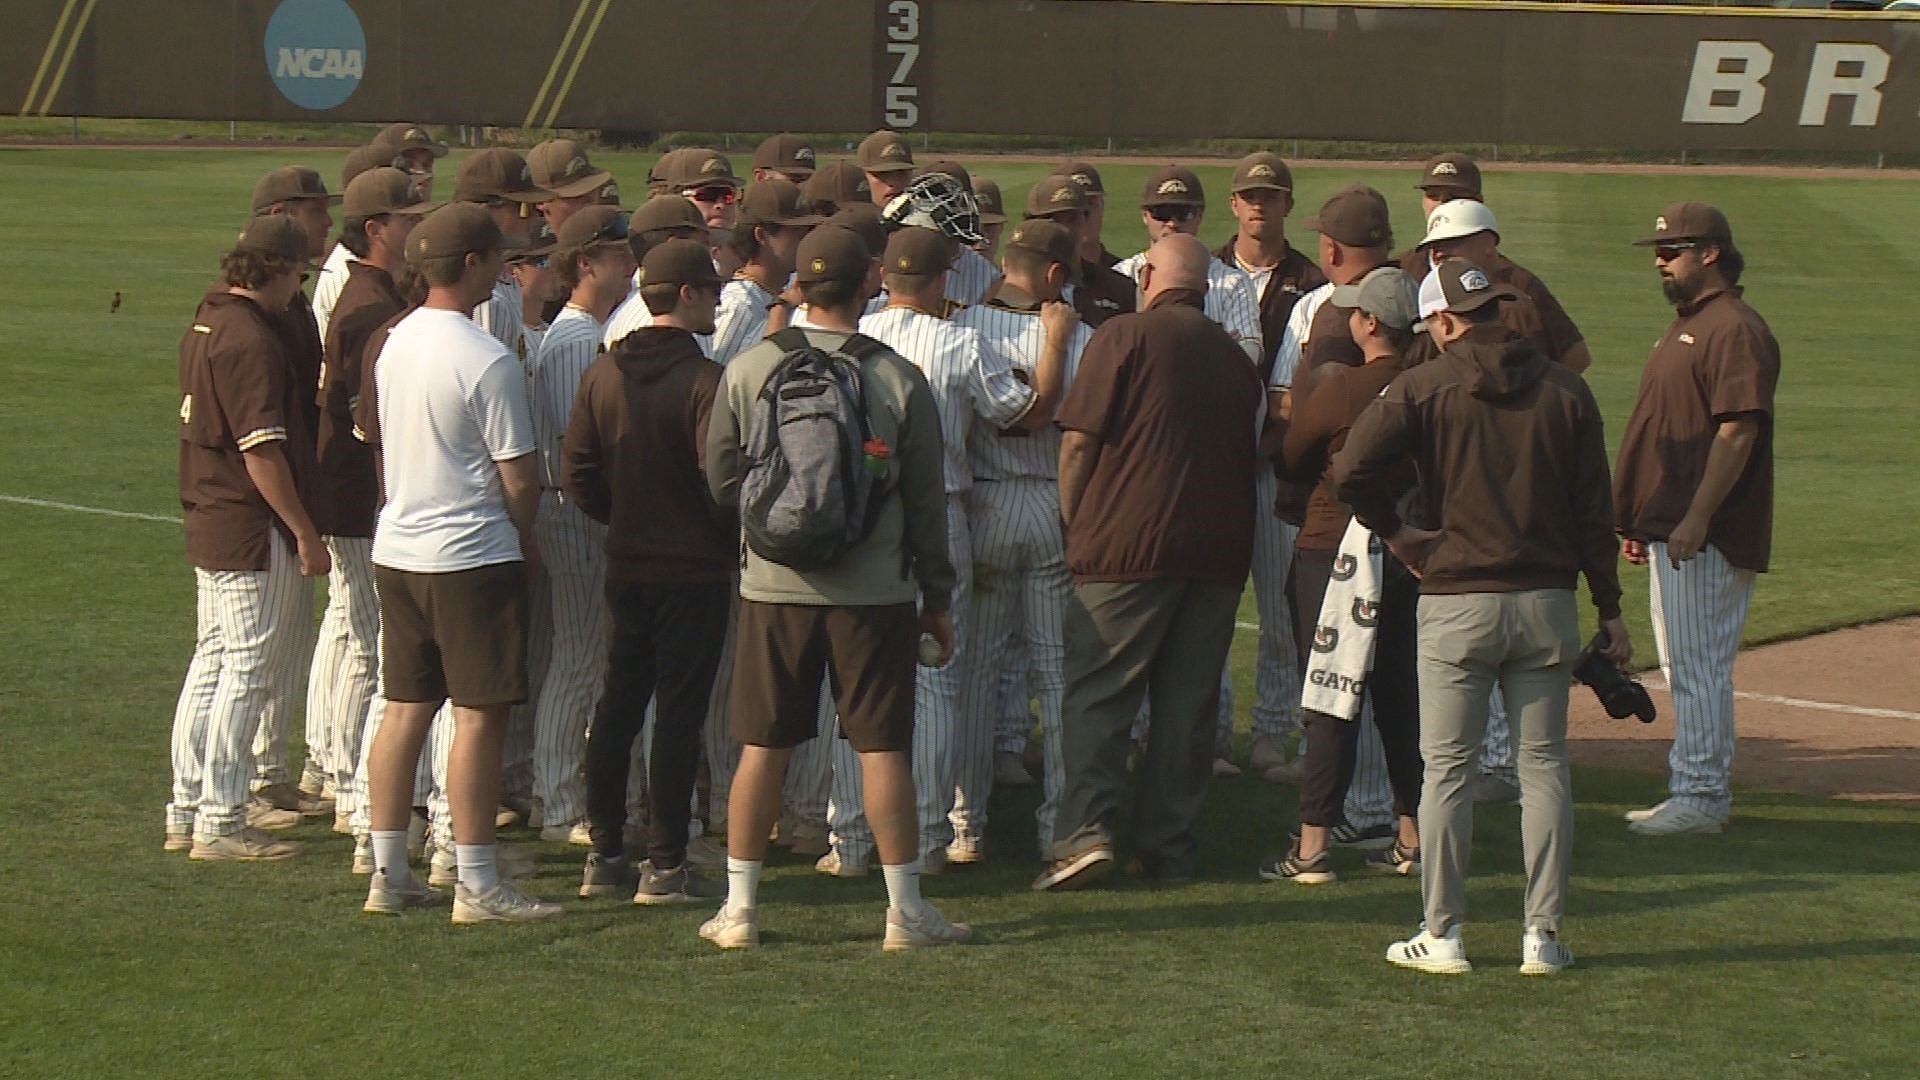 The Western Michigan baseball team opened up its series against rival Central Michigan with an 11-6 win on Thursday.